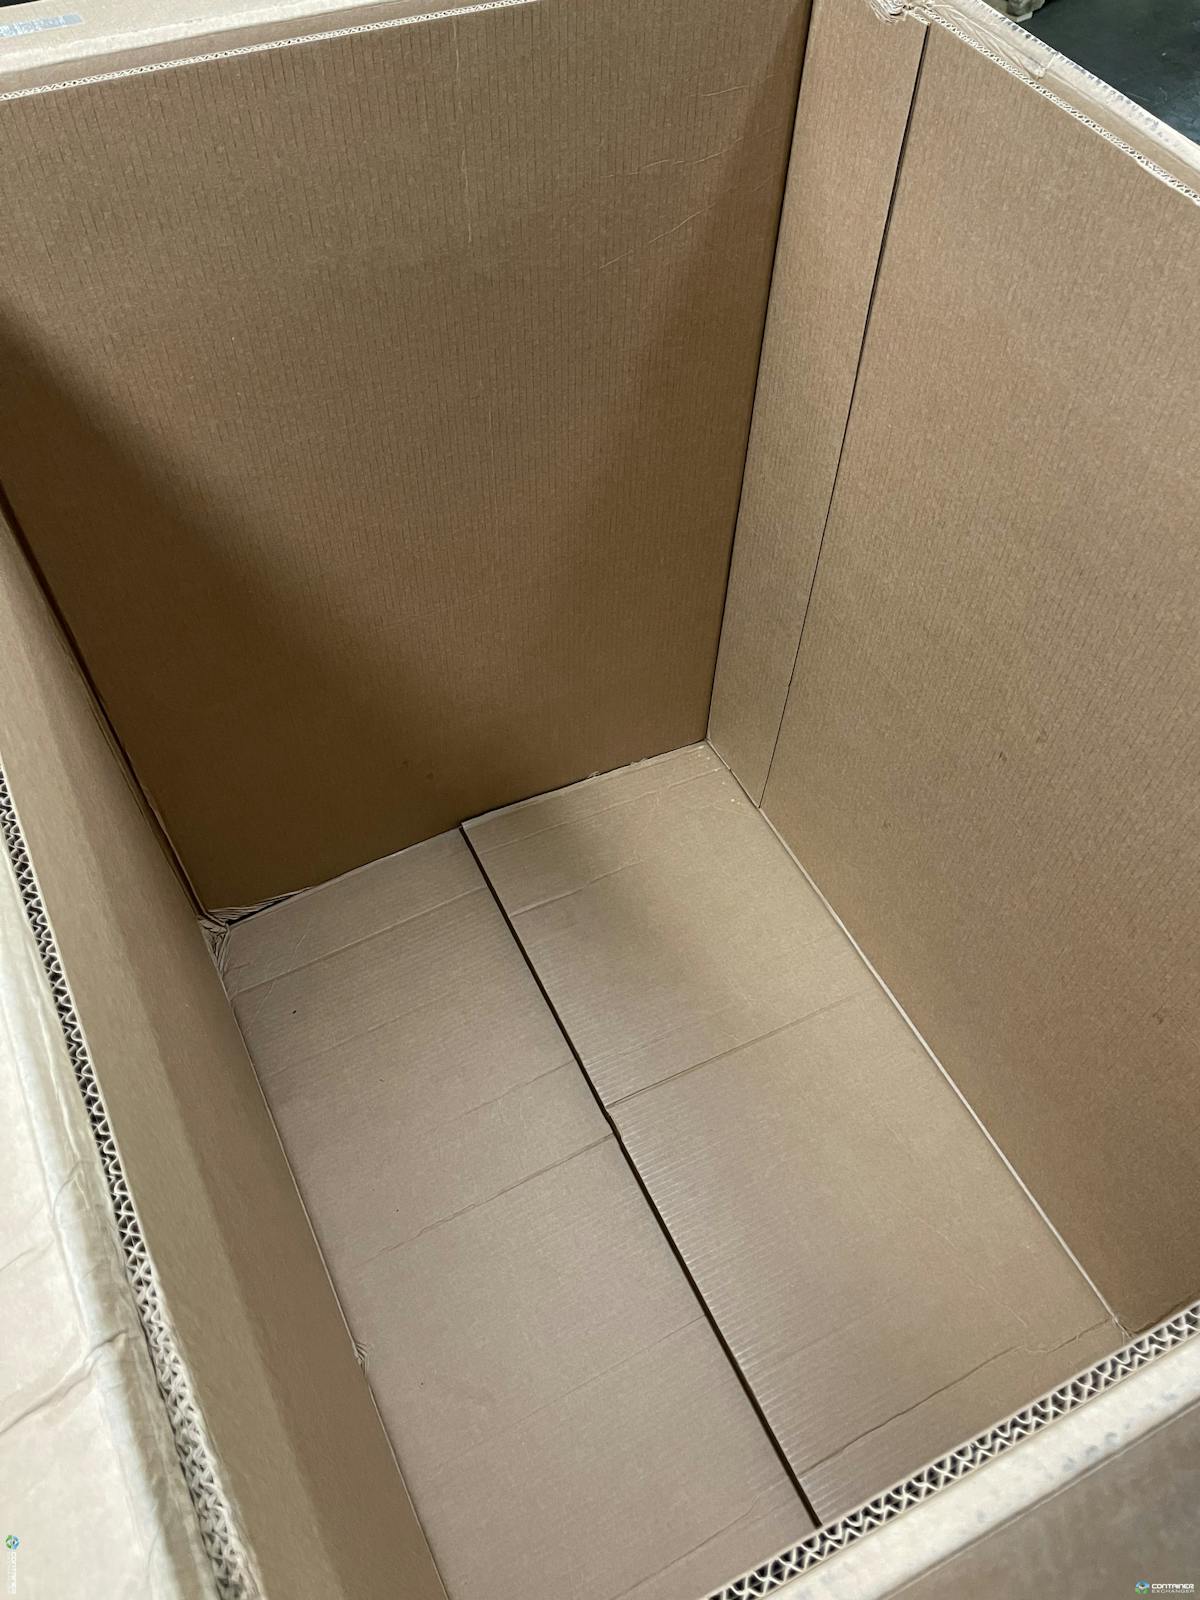 Gaylord Boxes For Sale: Used 48x40x51 Heavy Duty Triple Wall Gaylord Box Shipping Box Pallet box Illinois In Illinois - image  2